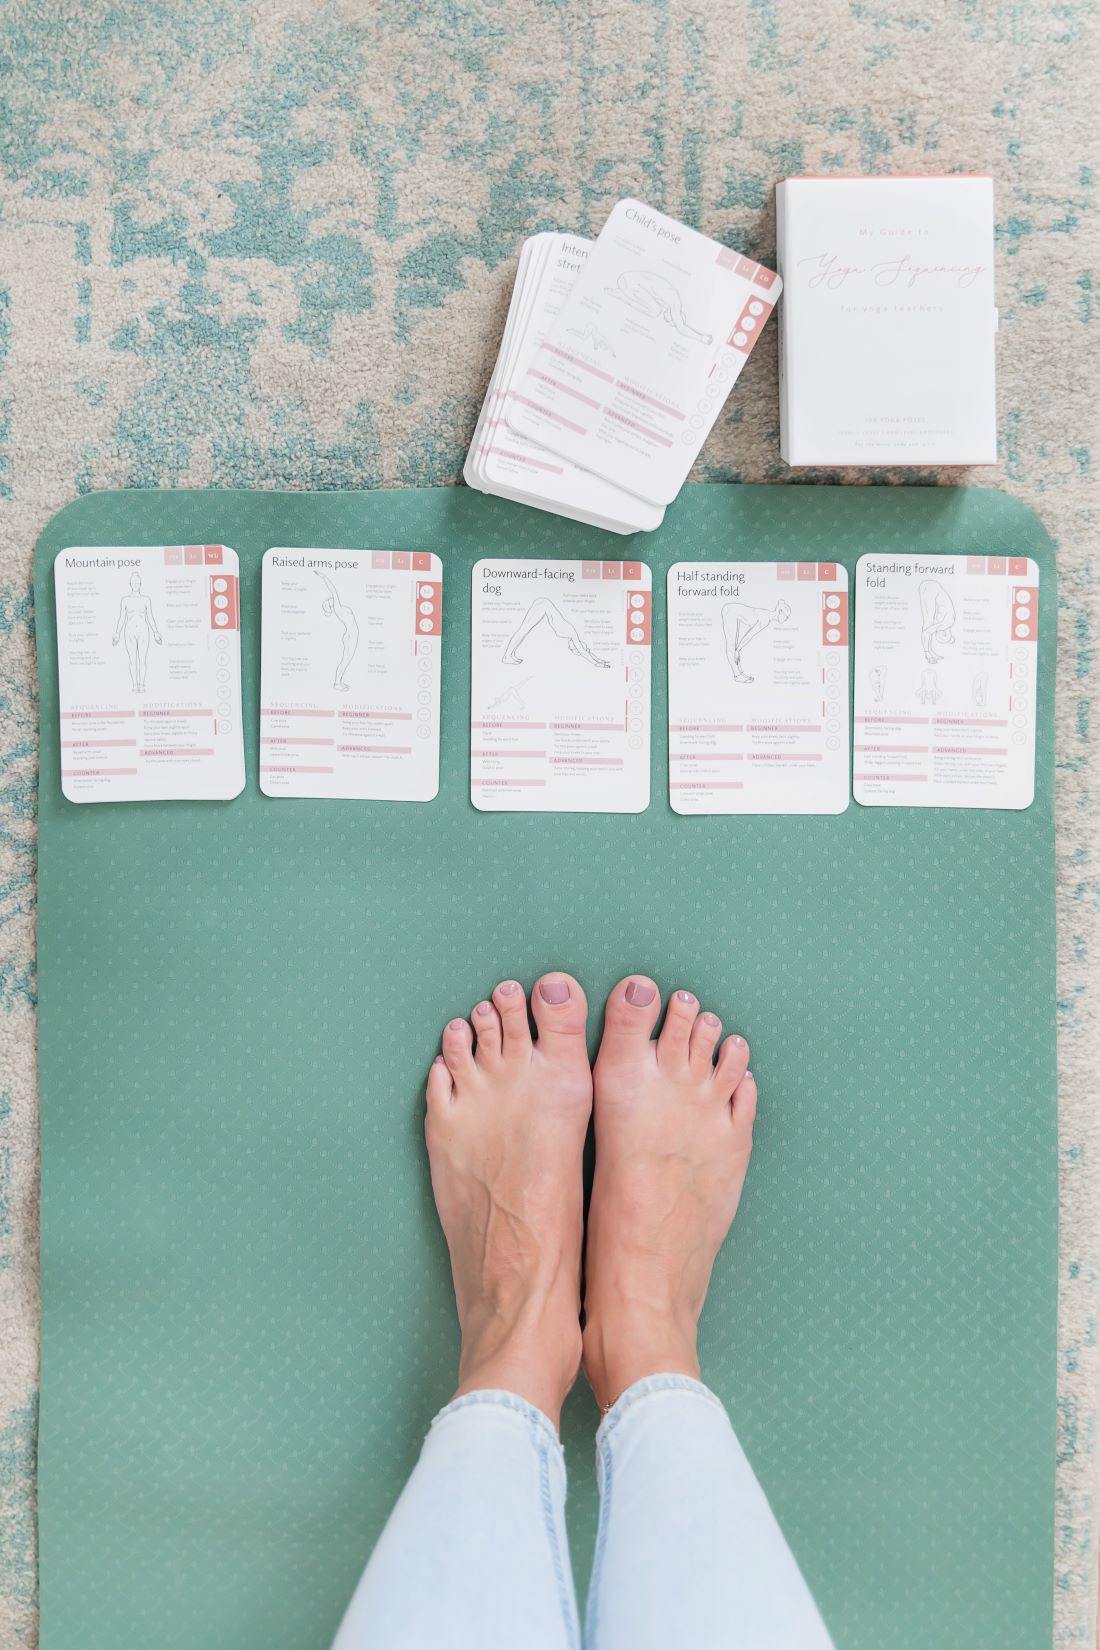 My Home Yoga Practice - 60 cards